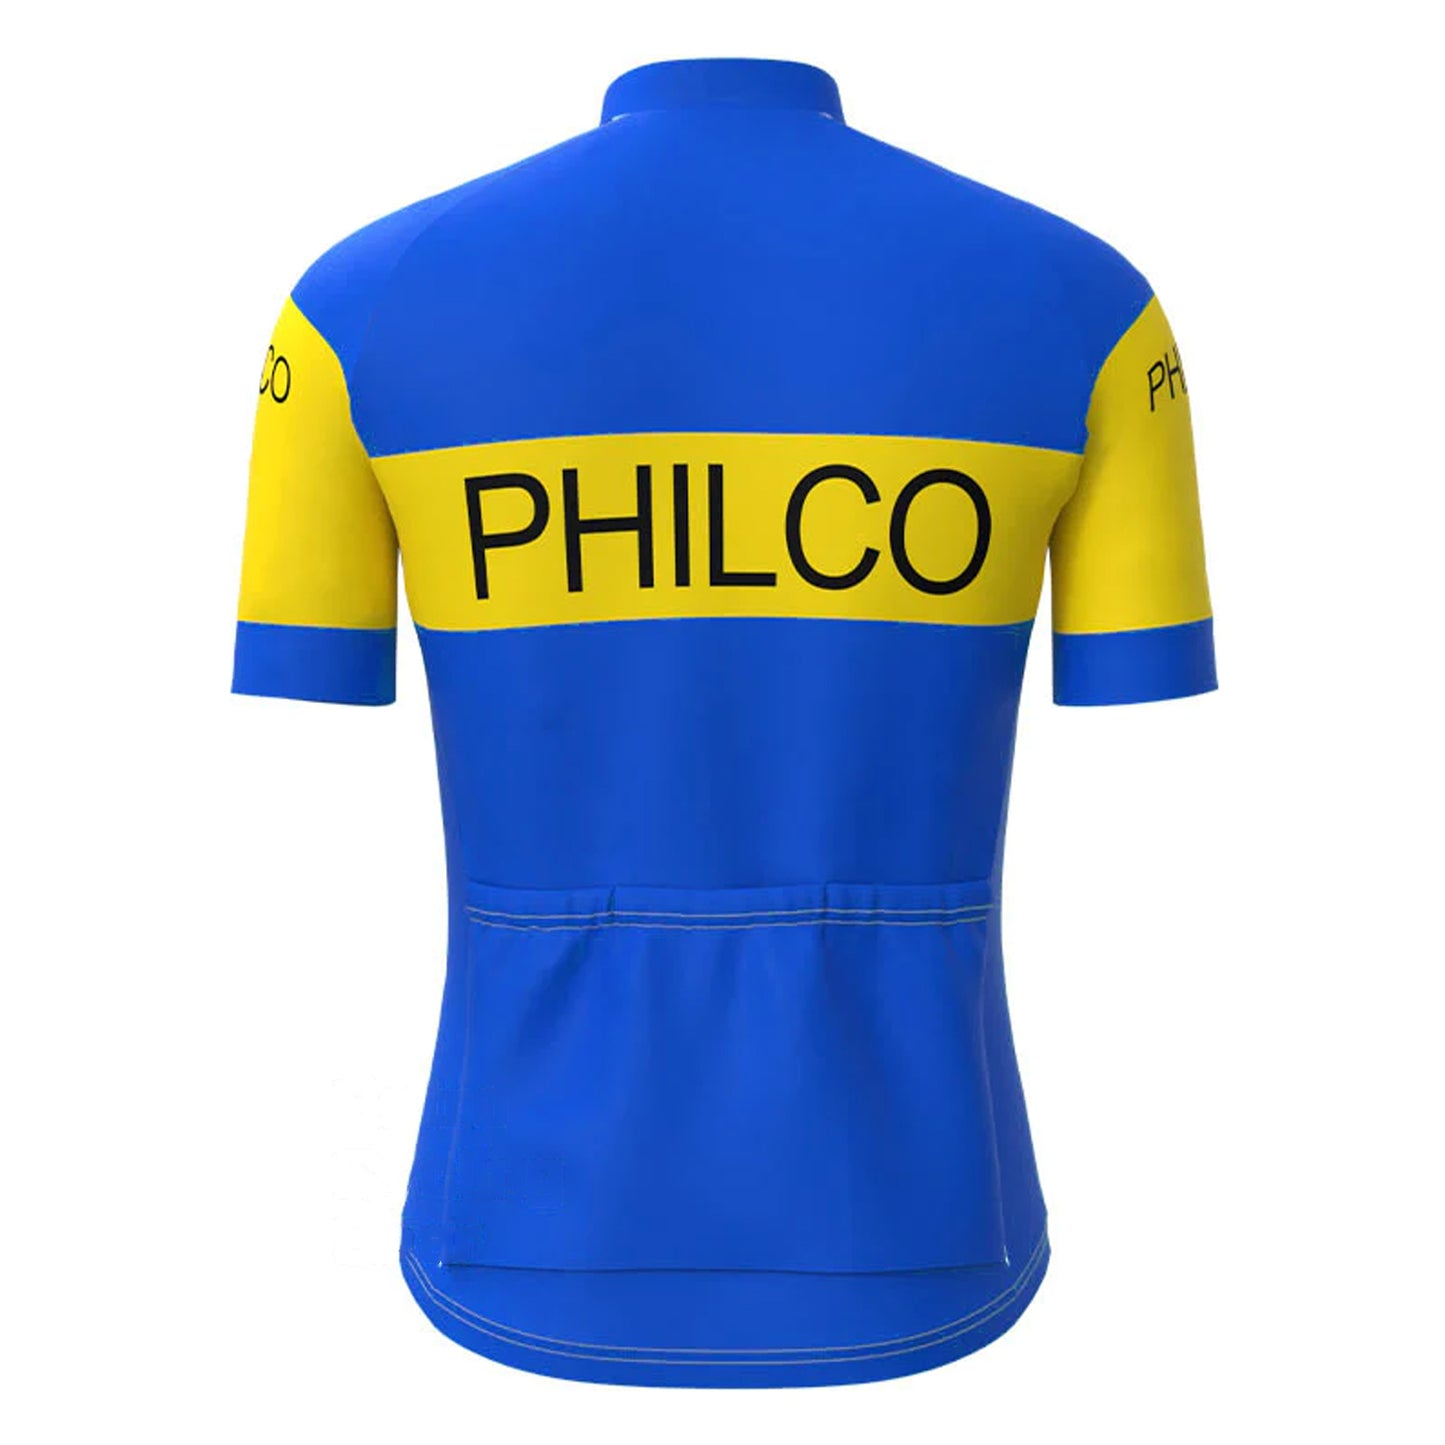 Philco Blue Vintage Short Sleeve Cycling Jersey Top